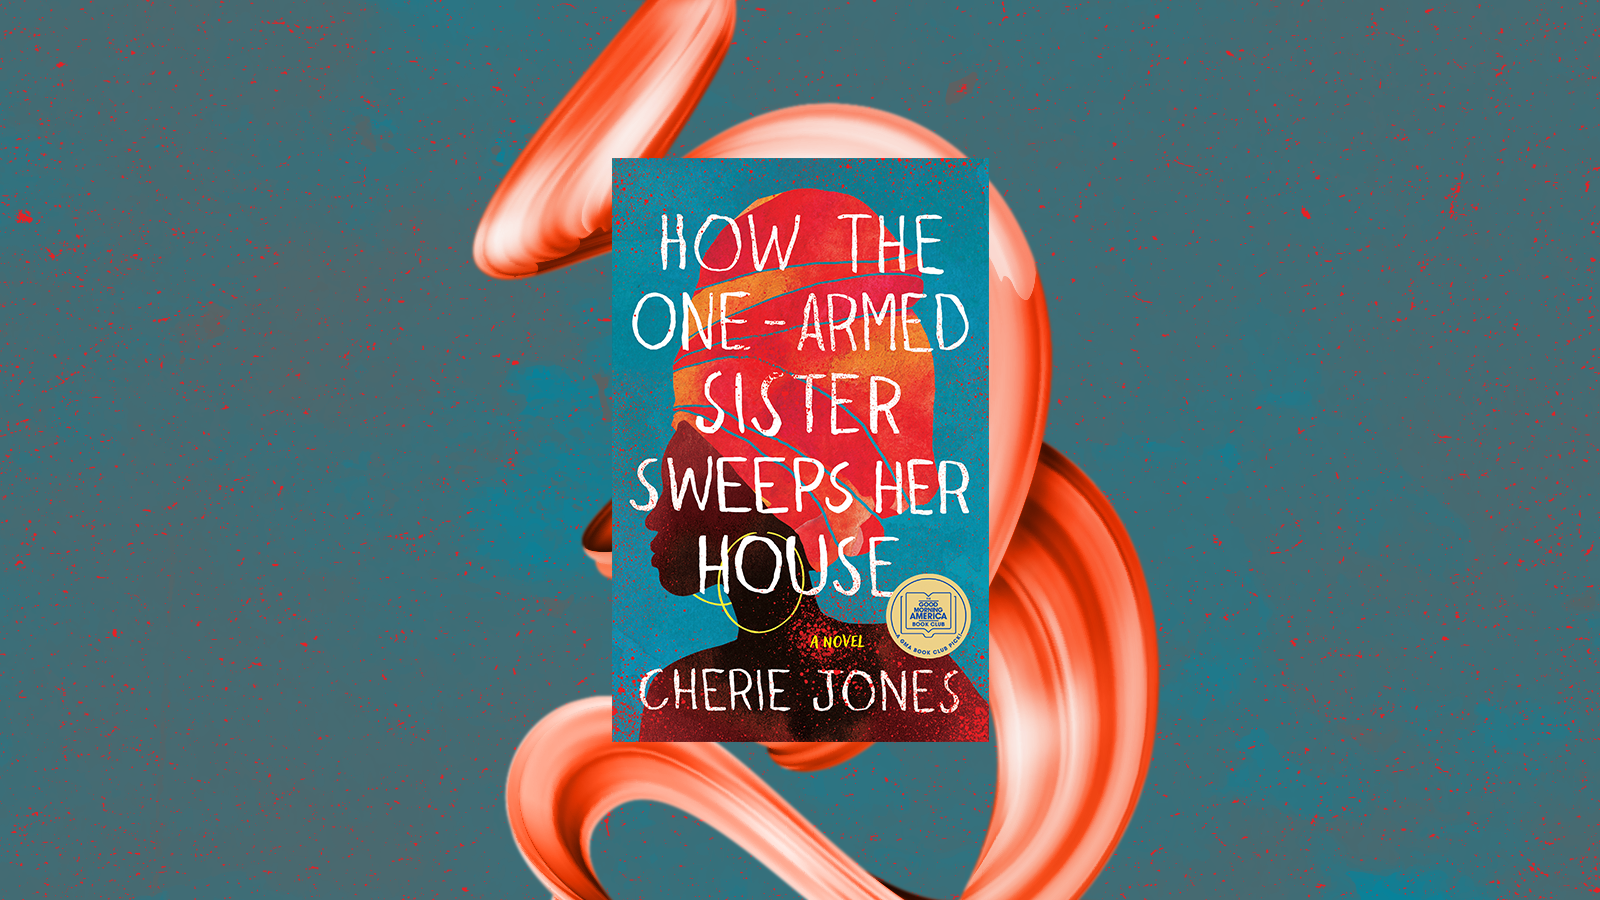 'How the One-Armed Sister Sweeps Her House' by Cherie Jones